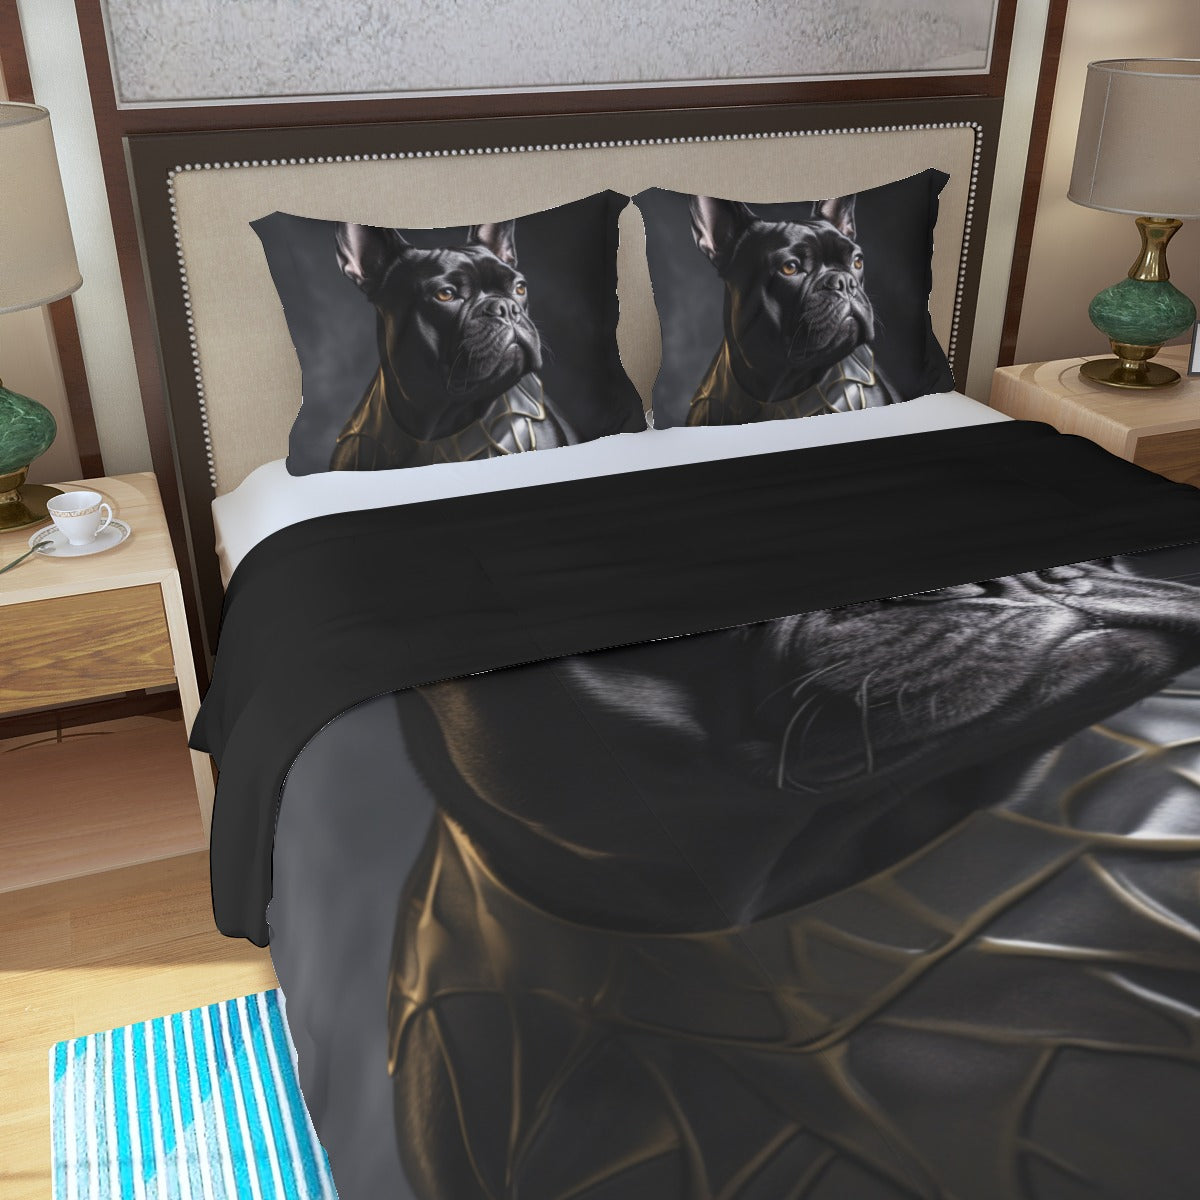 Stealthy Frenchie Duvet Cover Set - Sleep with Prowess